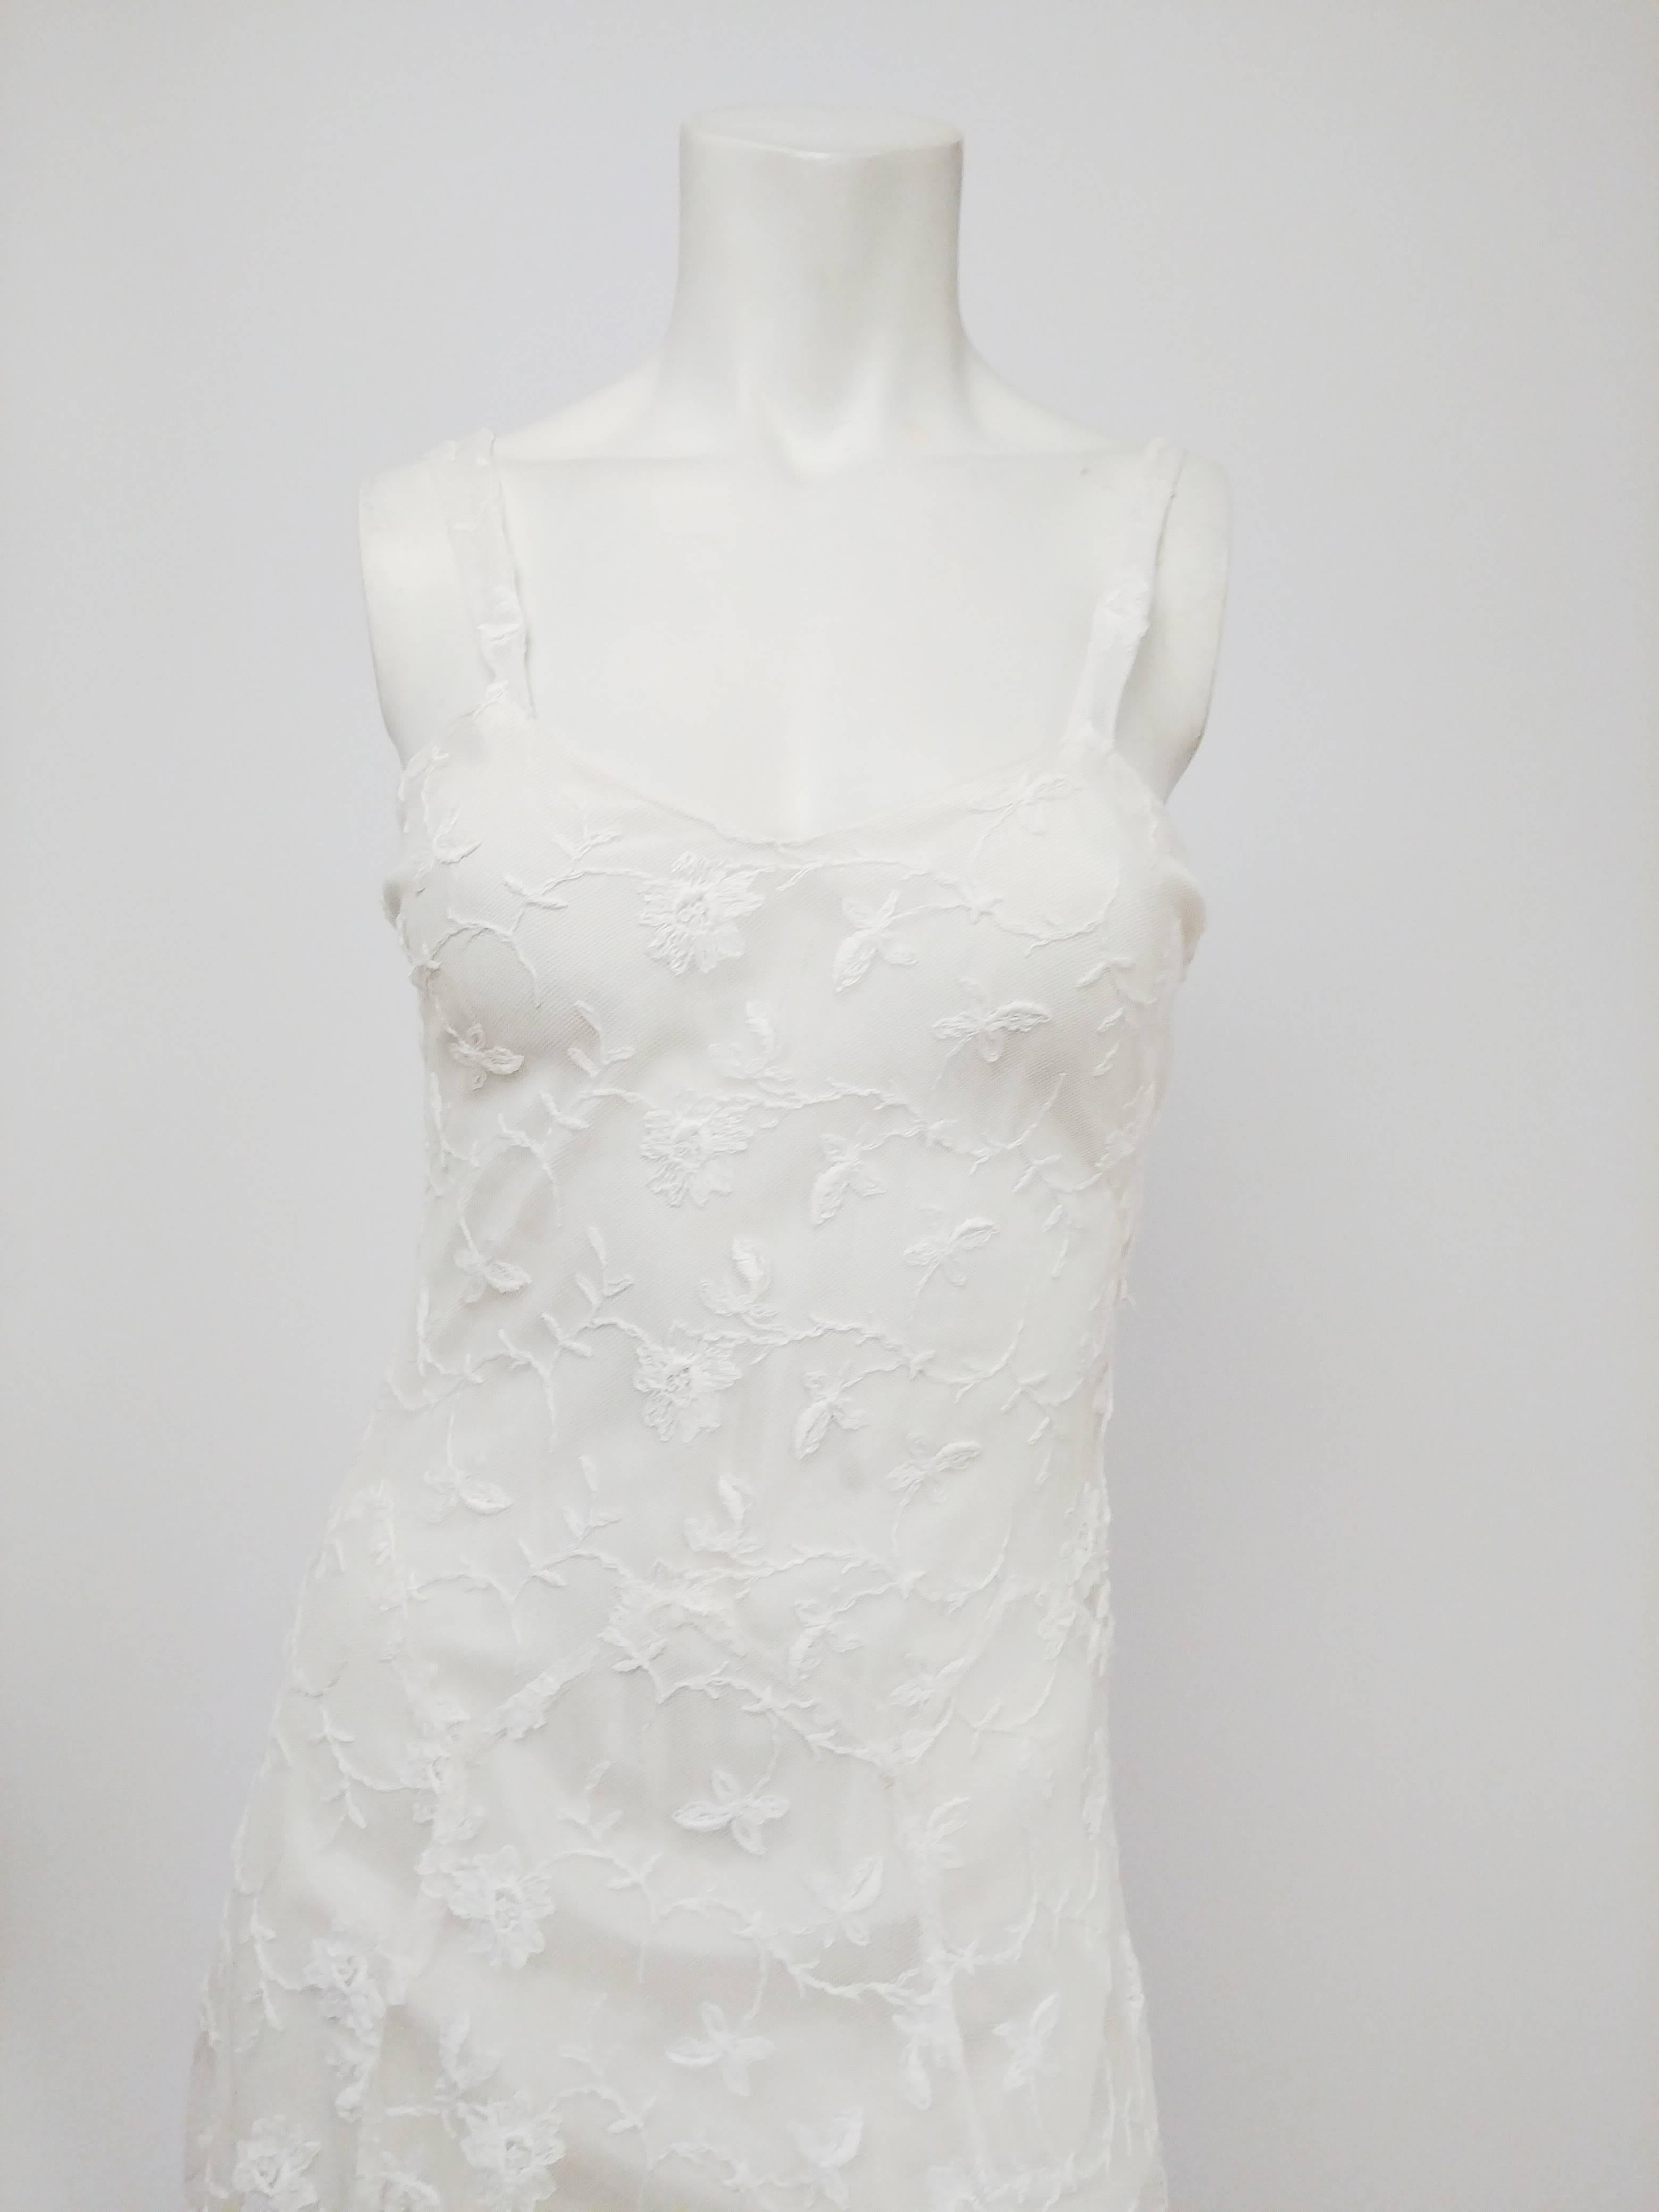 1930s White Lace Wedding Dress. White all-over lace dress over built-in slip. Side snap closures. Zigzag waist seam adds subtle detail and lines to this elegant, simple dress.